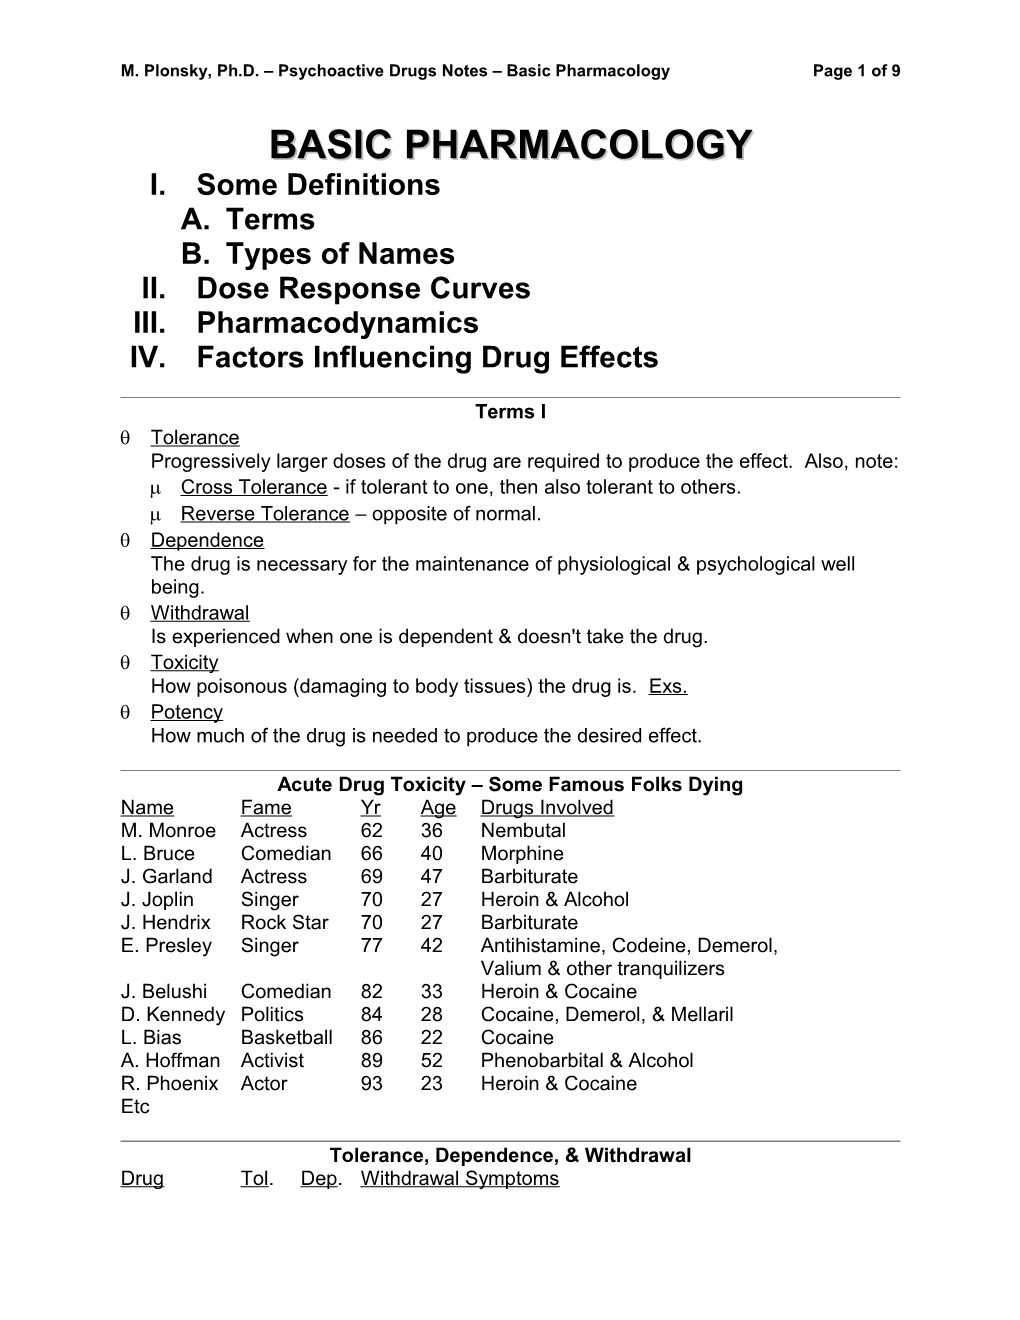 M. Plonsky, Ph.D. Psychoactive Drugs Notes Basic Pharmacologypage 1 of 9